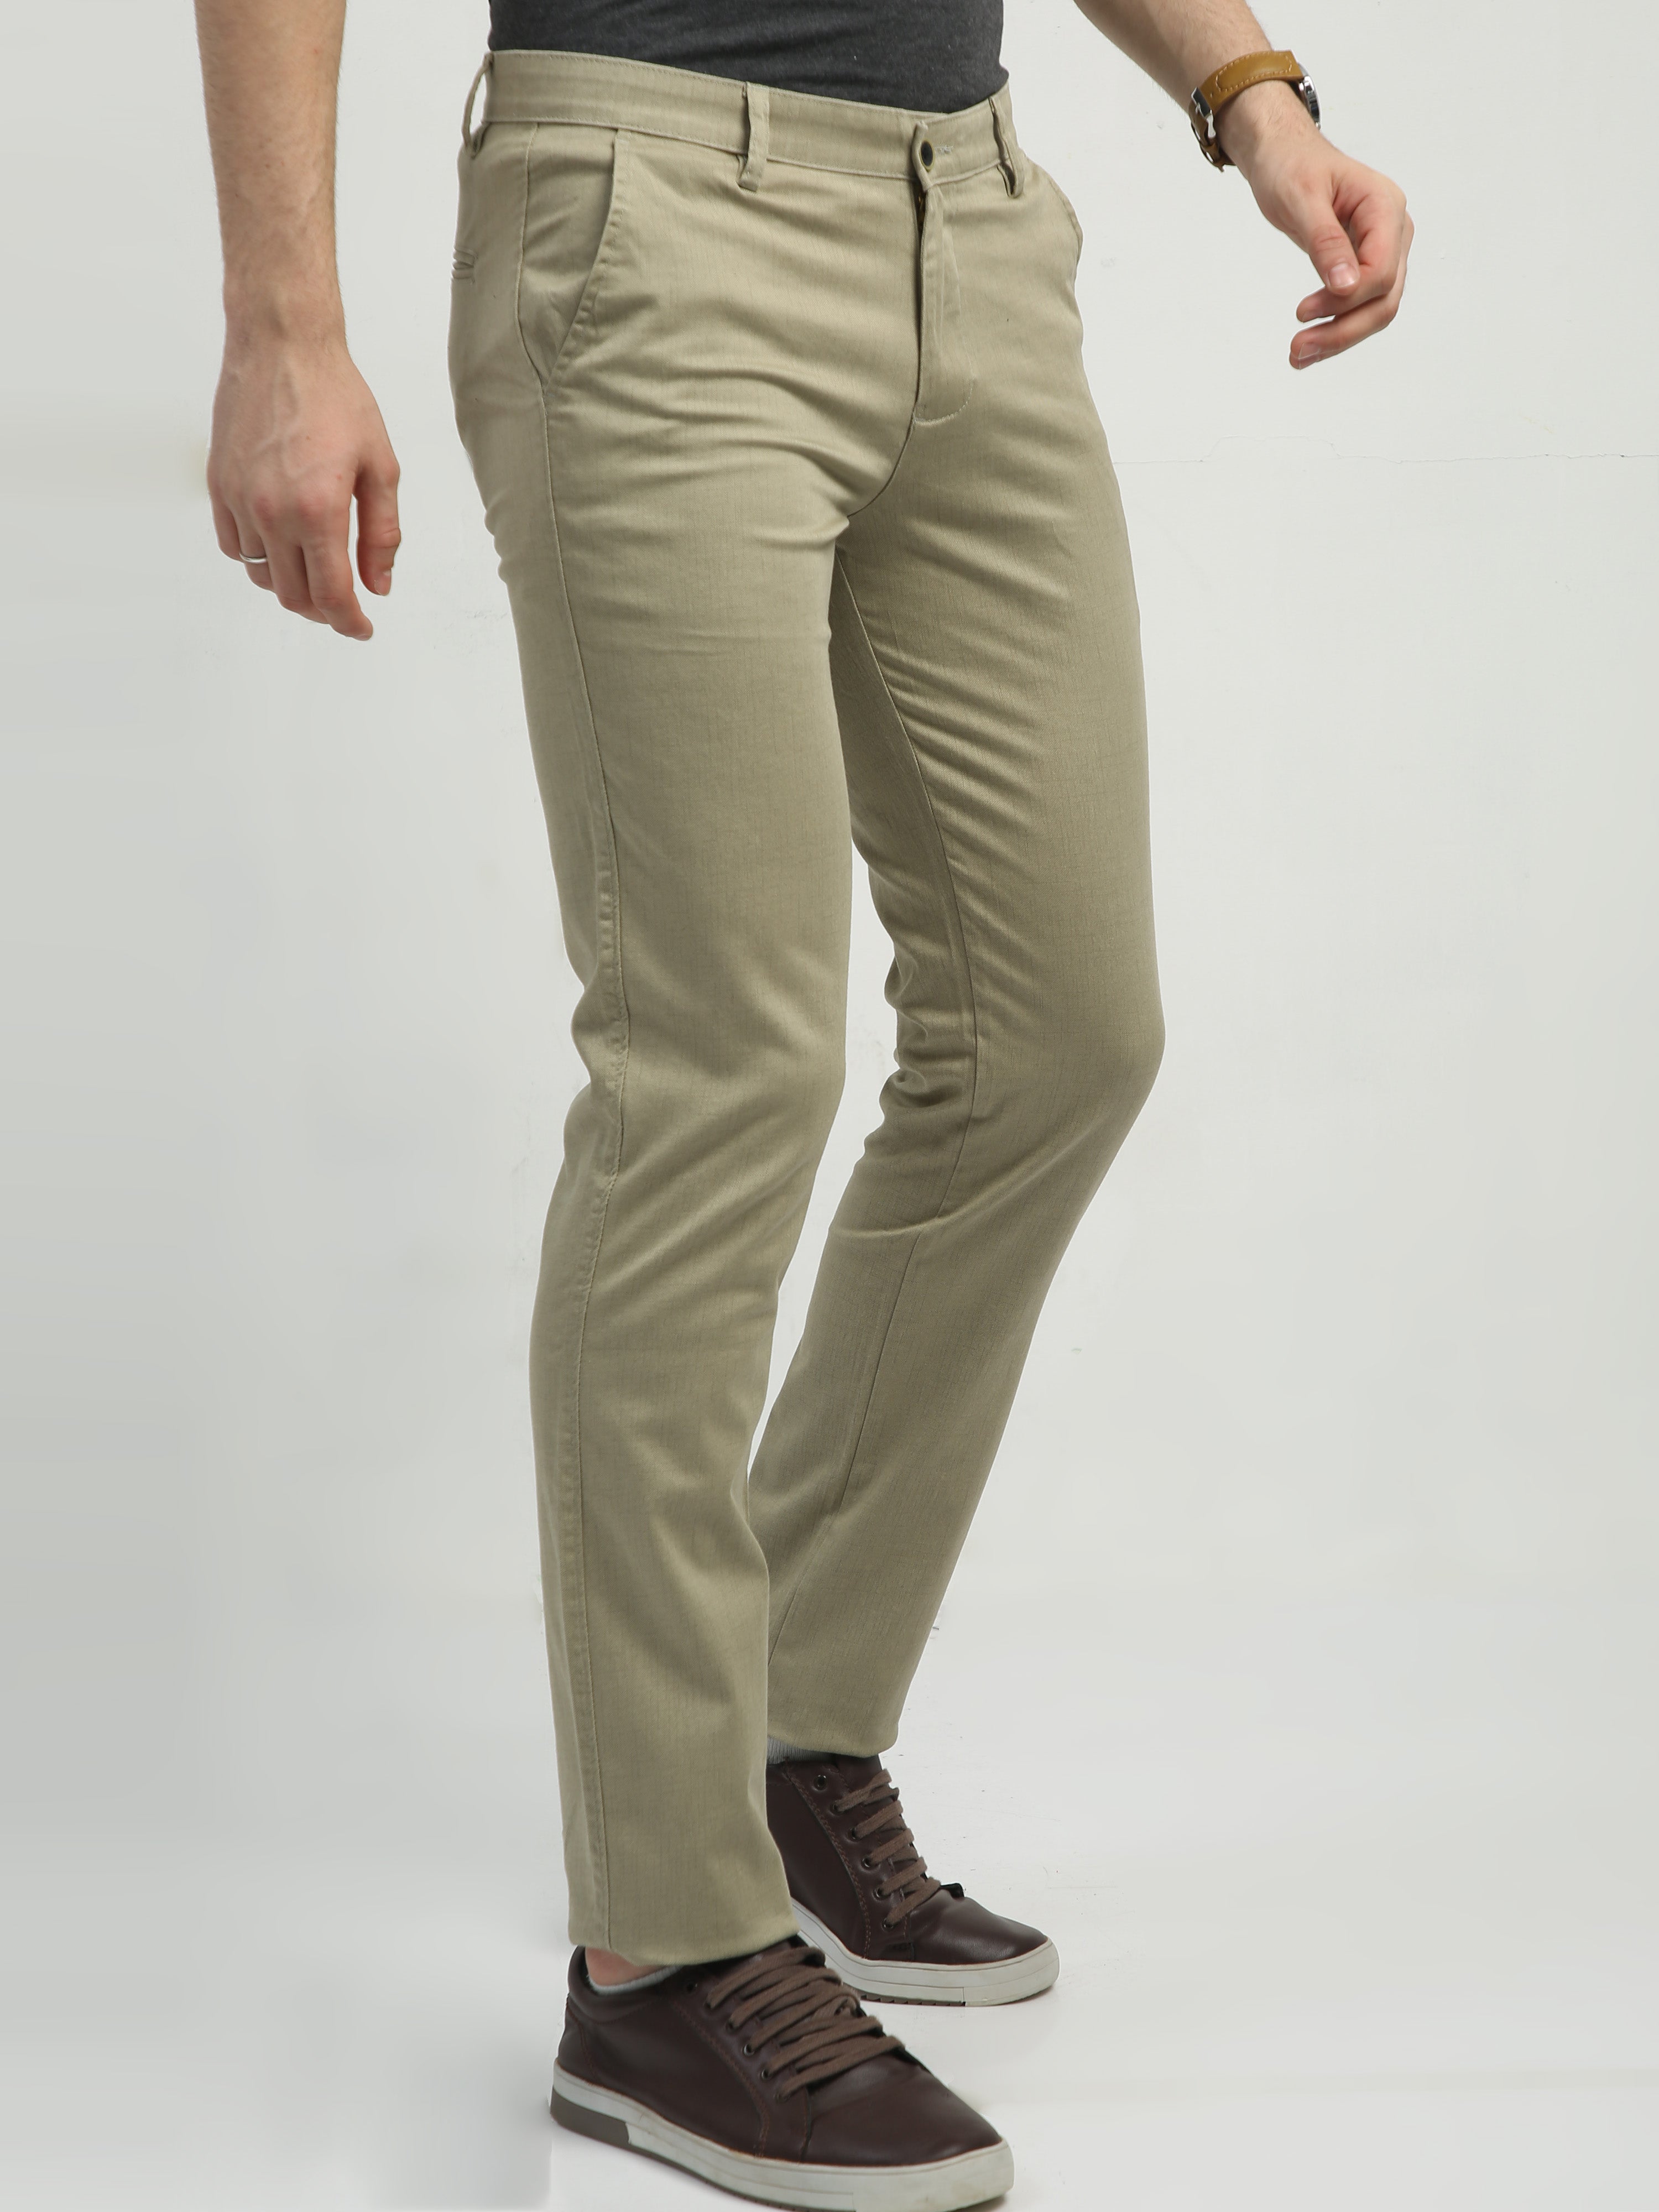 Regular Fit Casual Wear Mens Trousers Cotton at Rs 250 in Delhi | ID:  19500741562